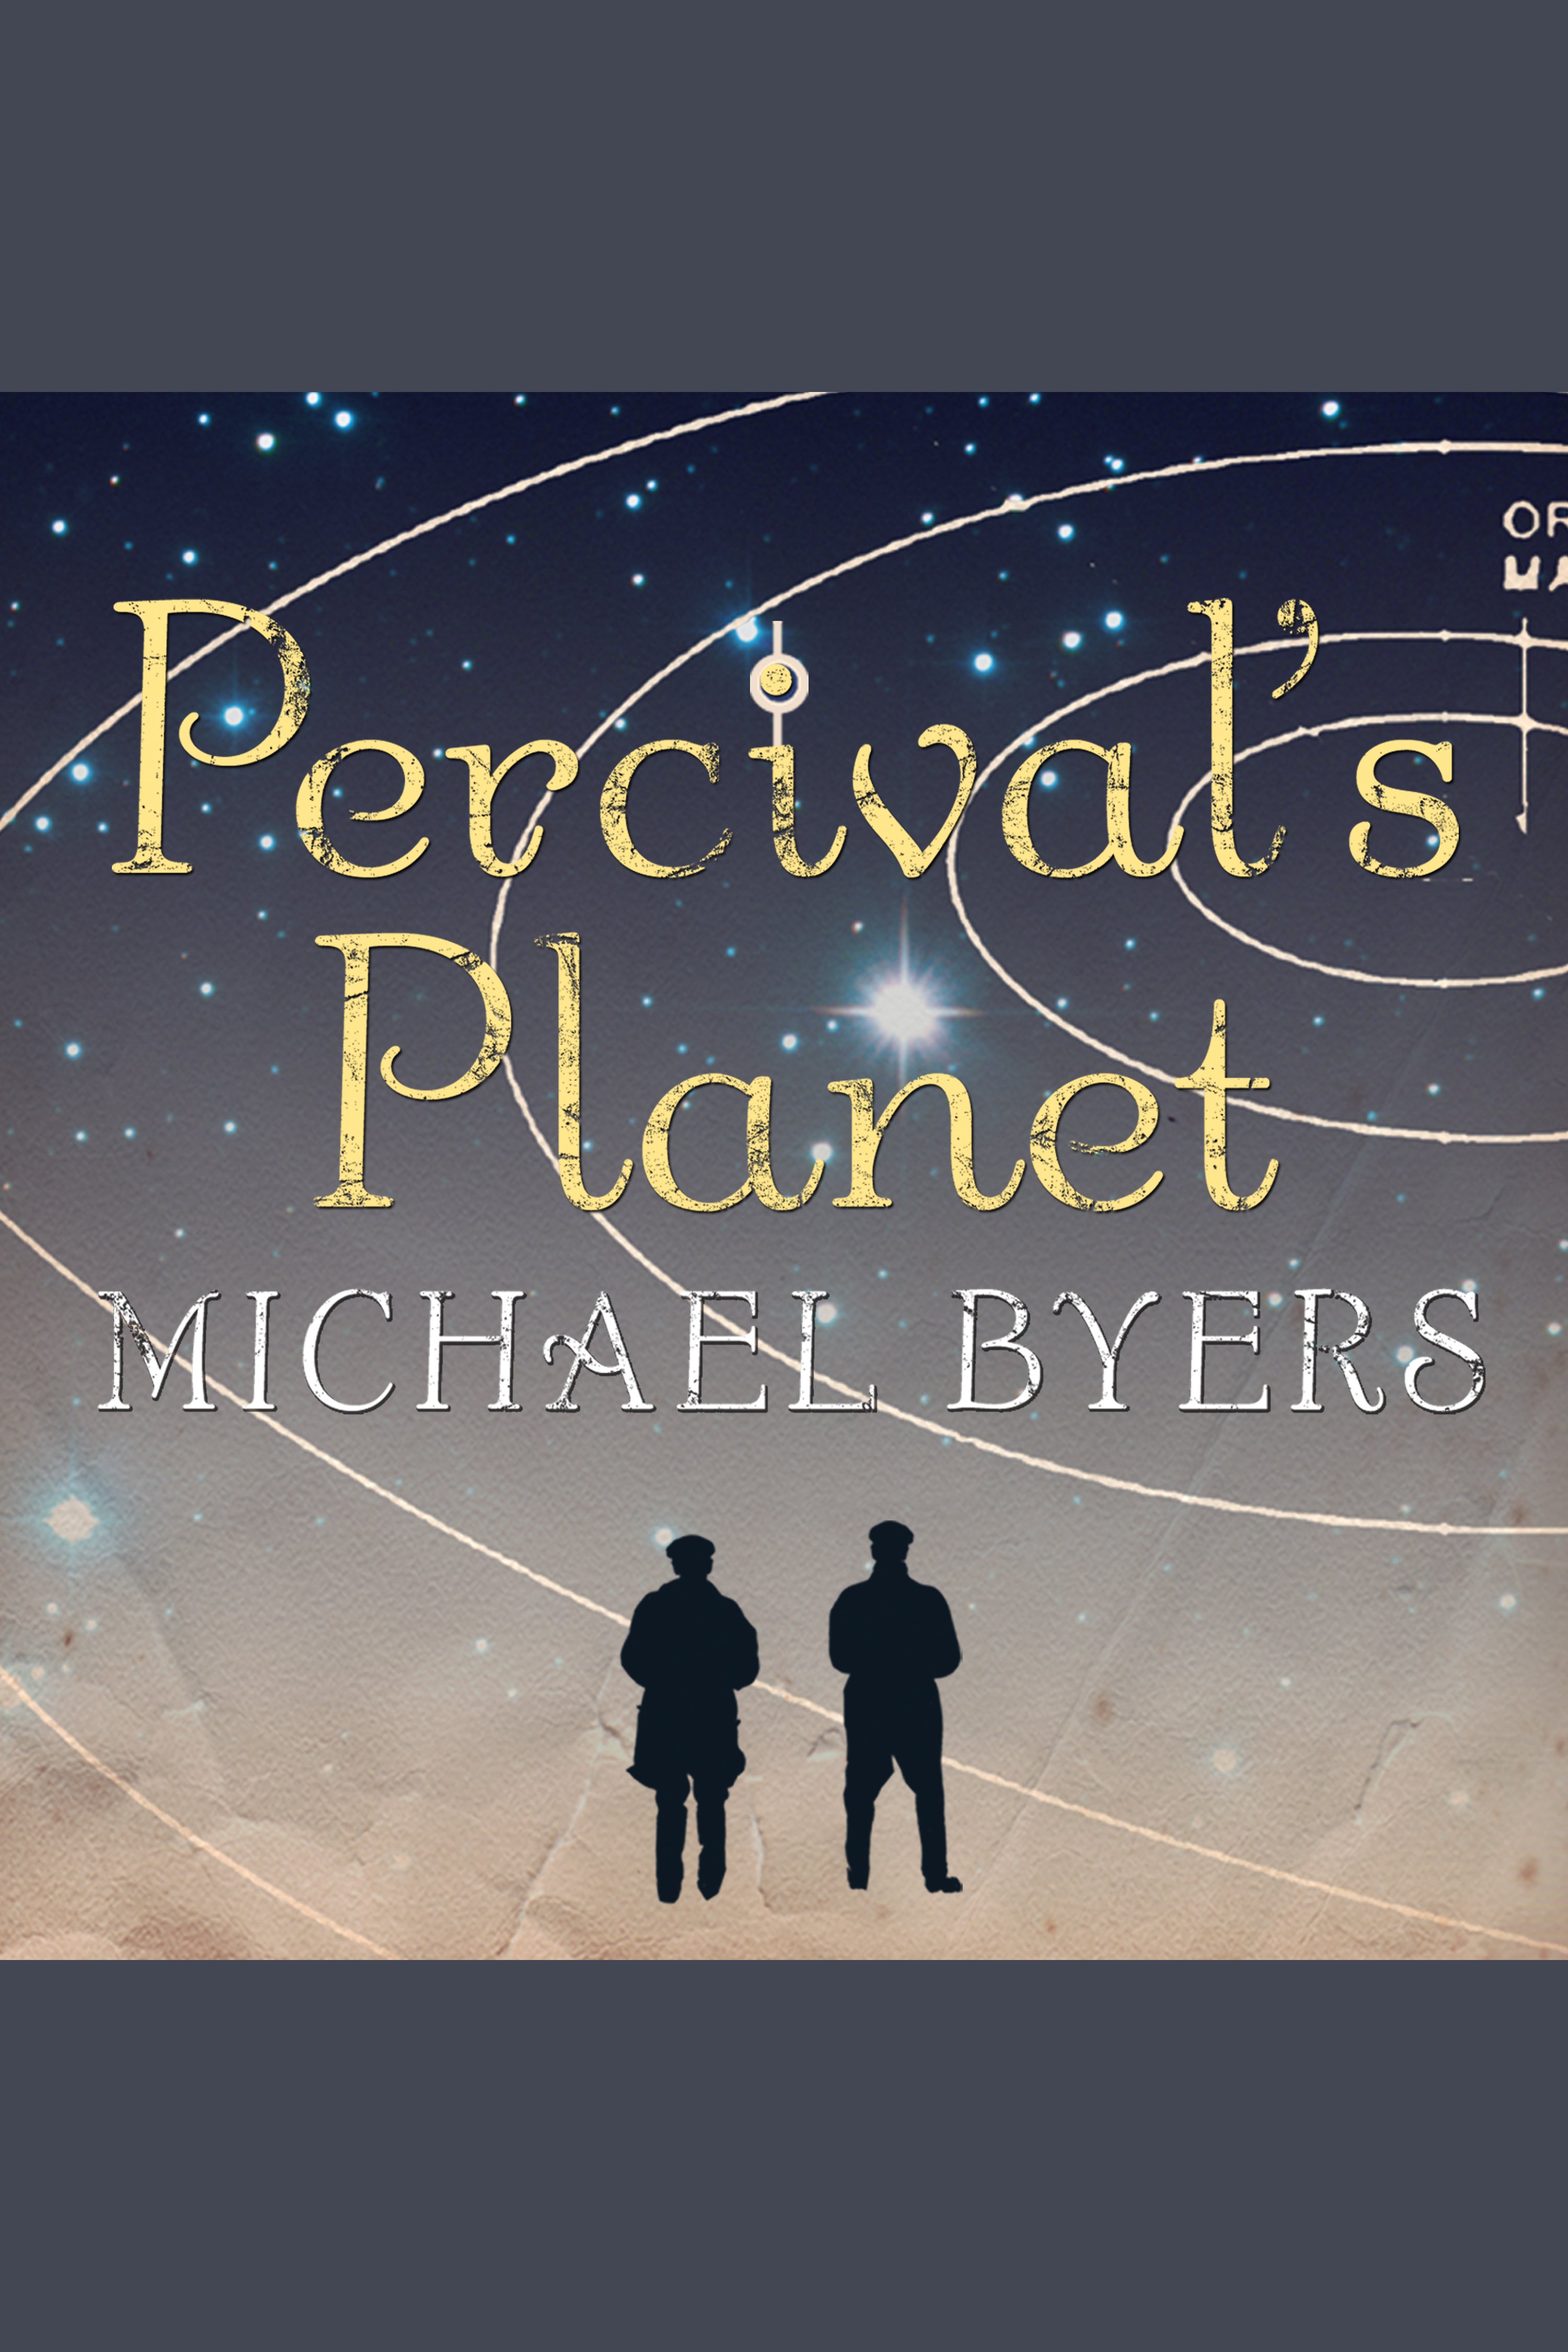 Percival's planet cover image